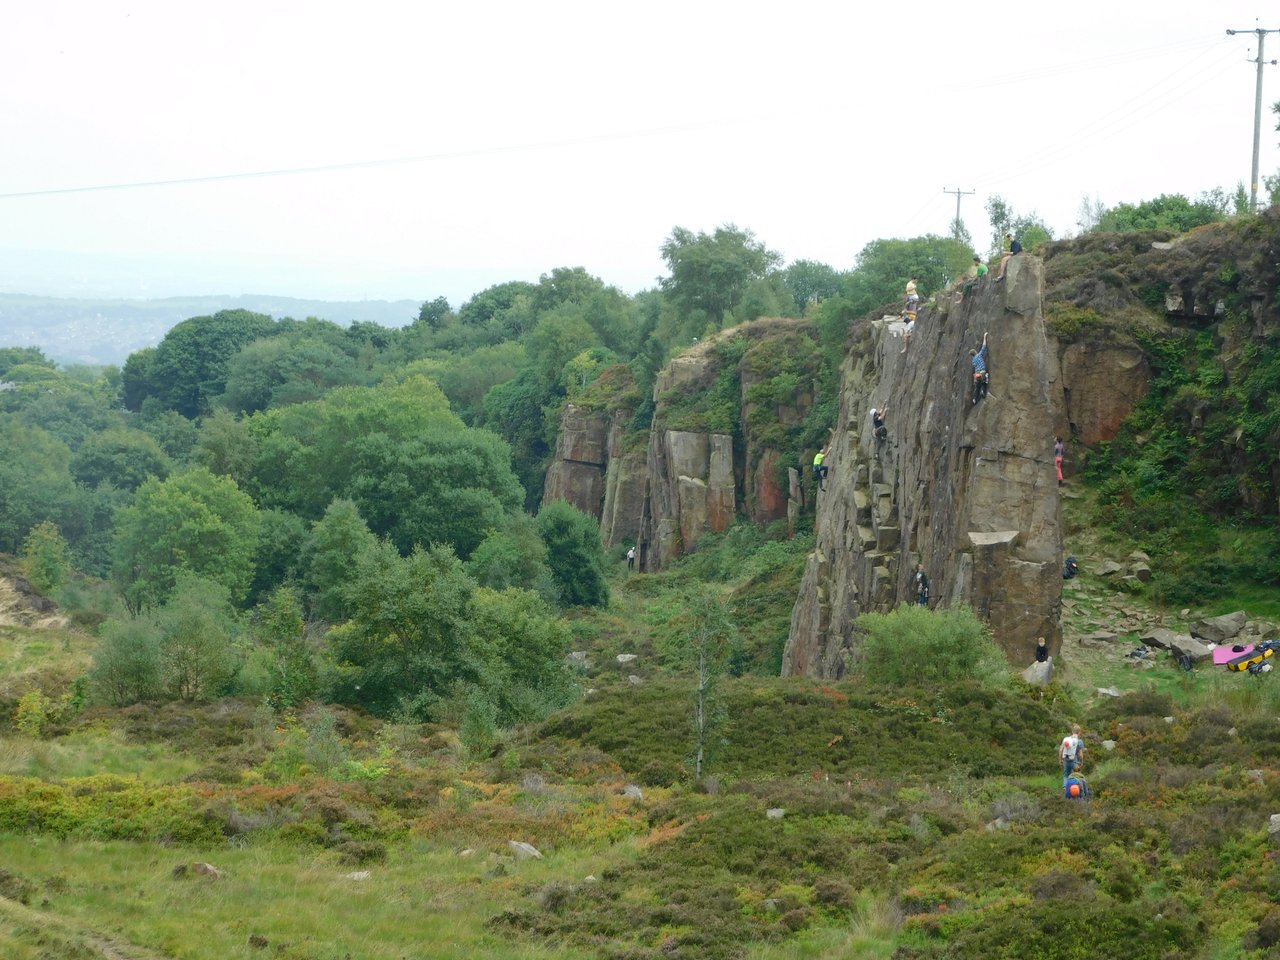 A view of Wilton 1 quarry featuring rock climbers on the prow